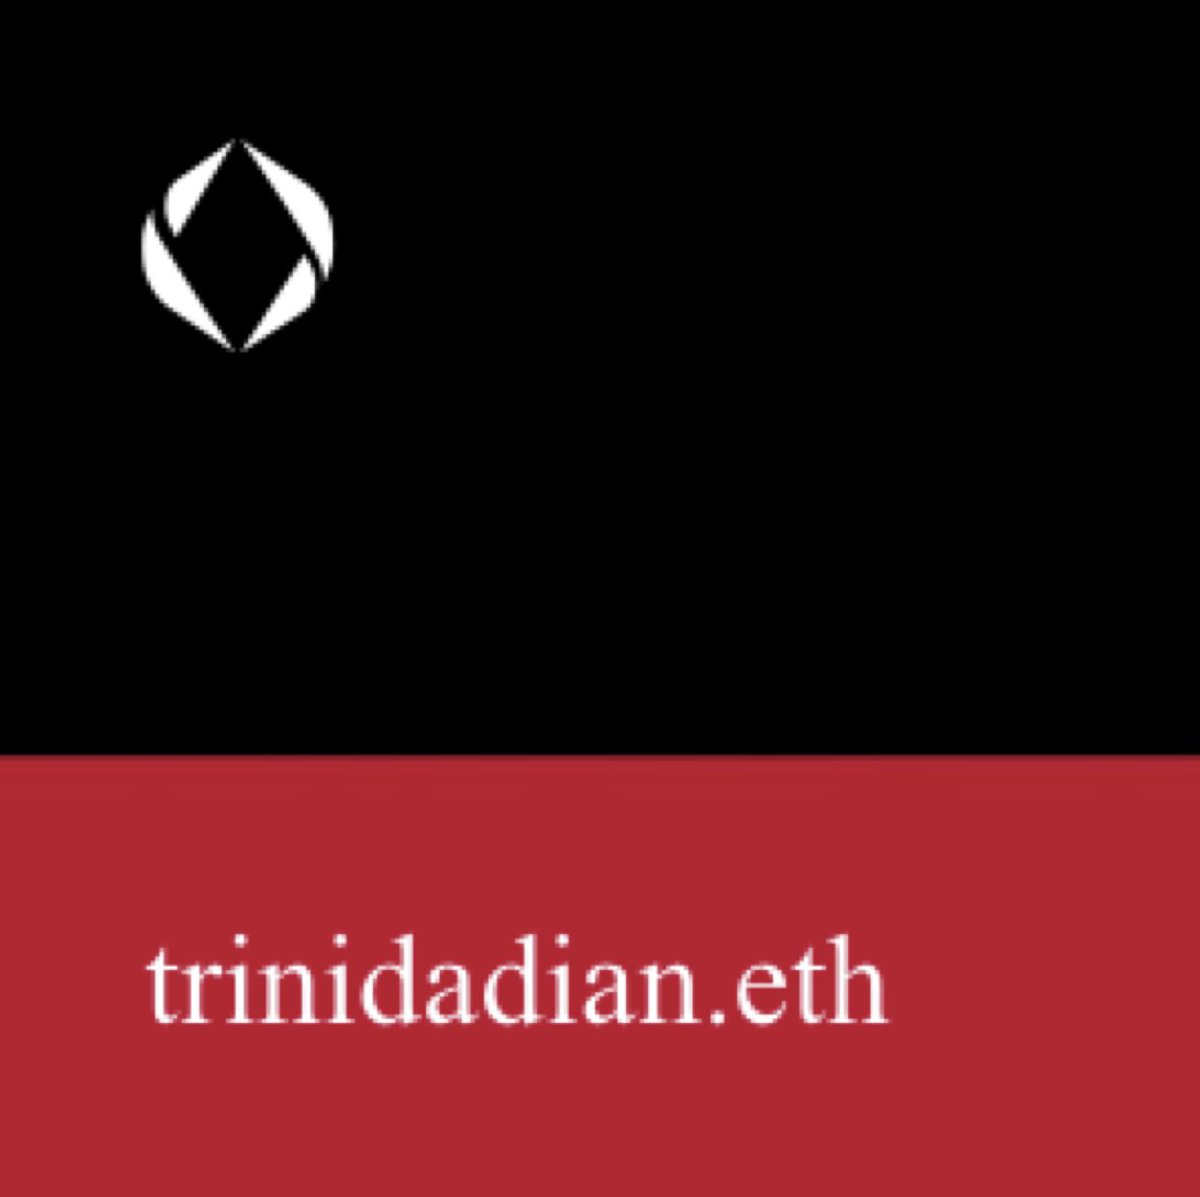 You mean to tell me it’s not one Trinidad 🇹🇹 native in web3 nor a Female Navy Veteran in web3 🤔 #navy #NavyBlues #NavyReadiness #TrinidadCarnival2024 #trinidad #ens #web3 #AI #eth